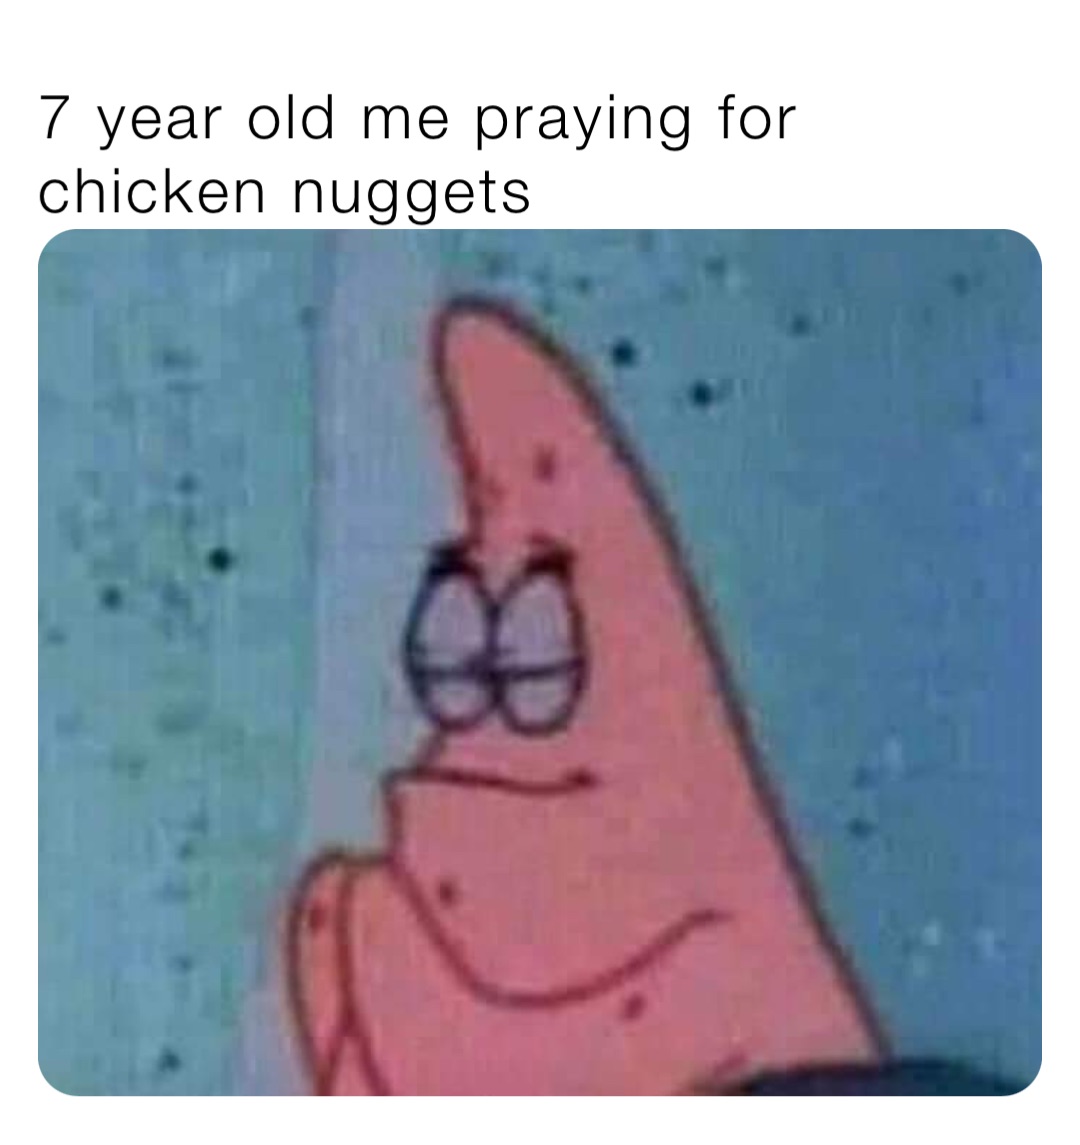 7 year old me praying for chicken nuggets